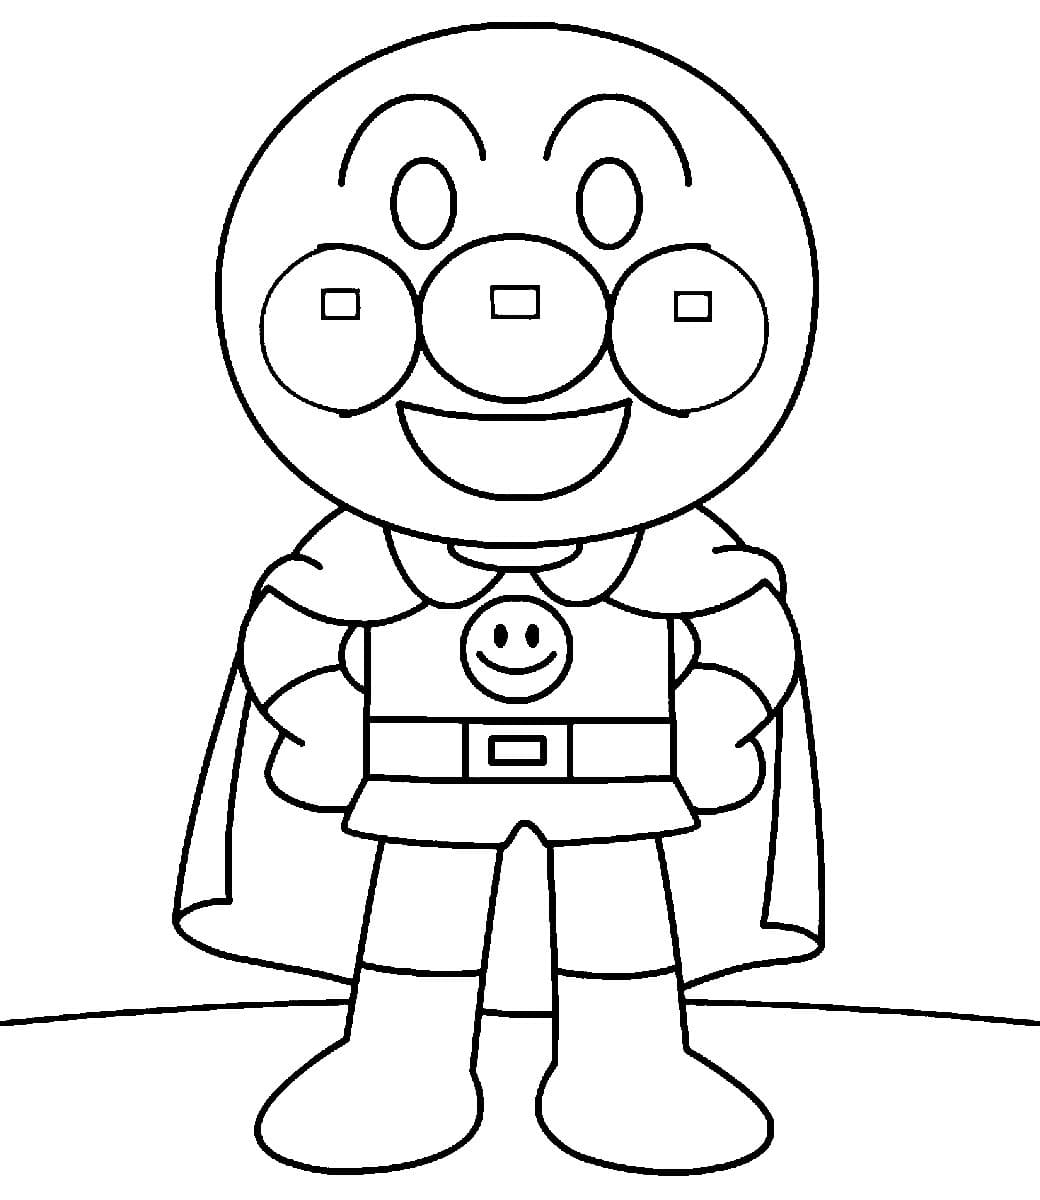 Anpanman Coloring Pages - Free Coloring Pages for Kids